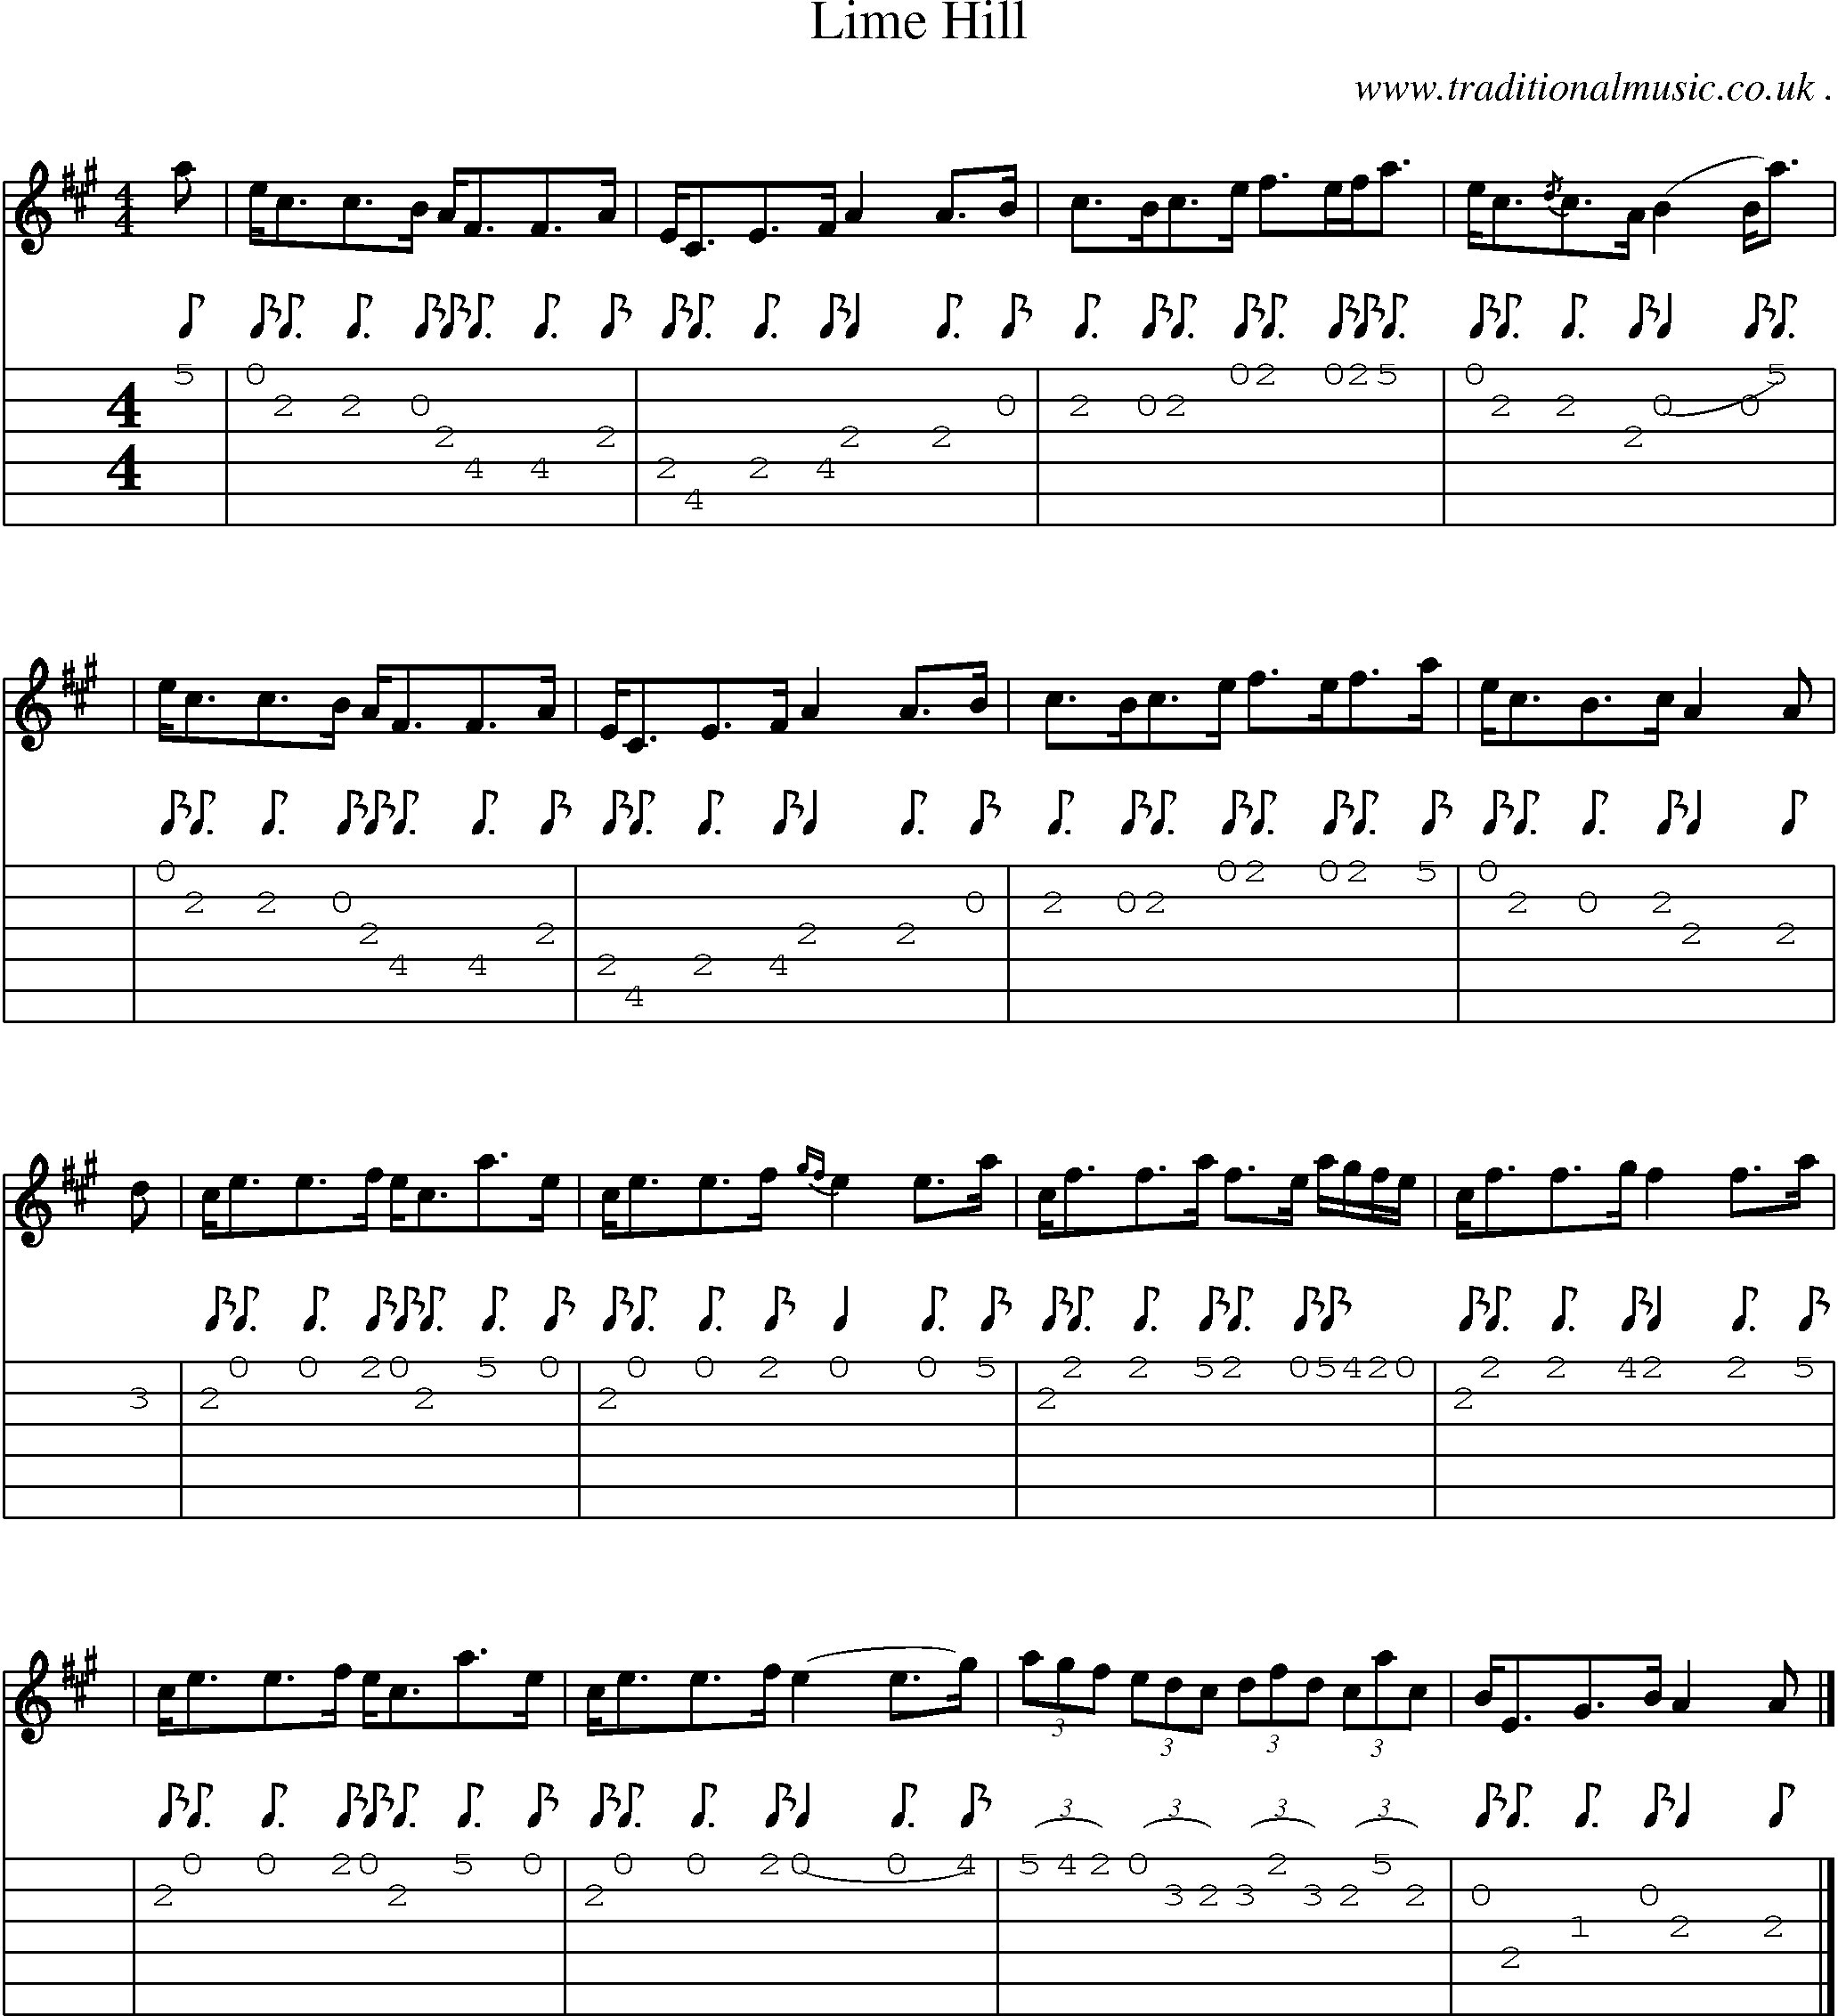 Sheet-music  score, Chords and Guitar Tabs for Lime Hill